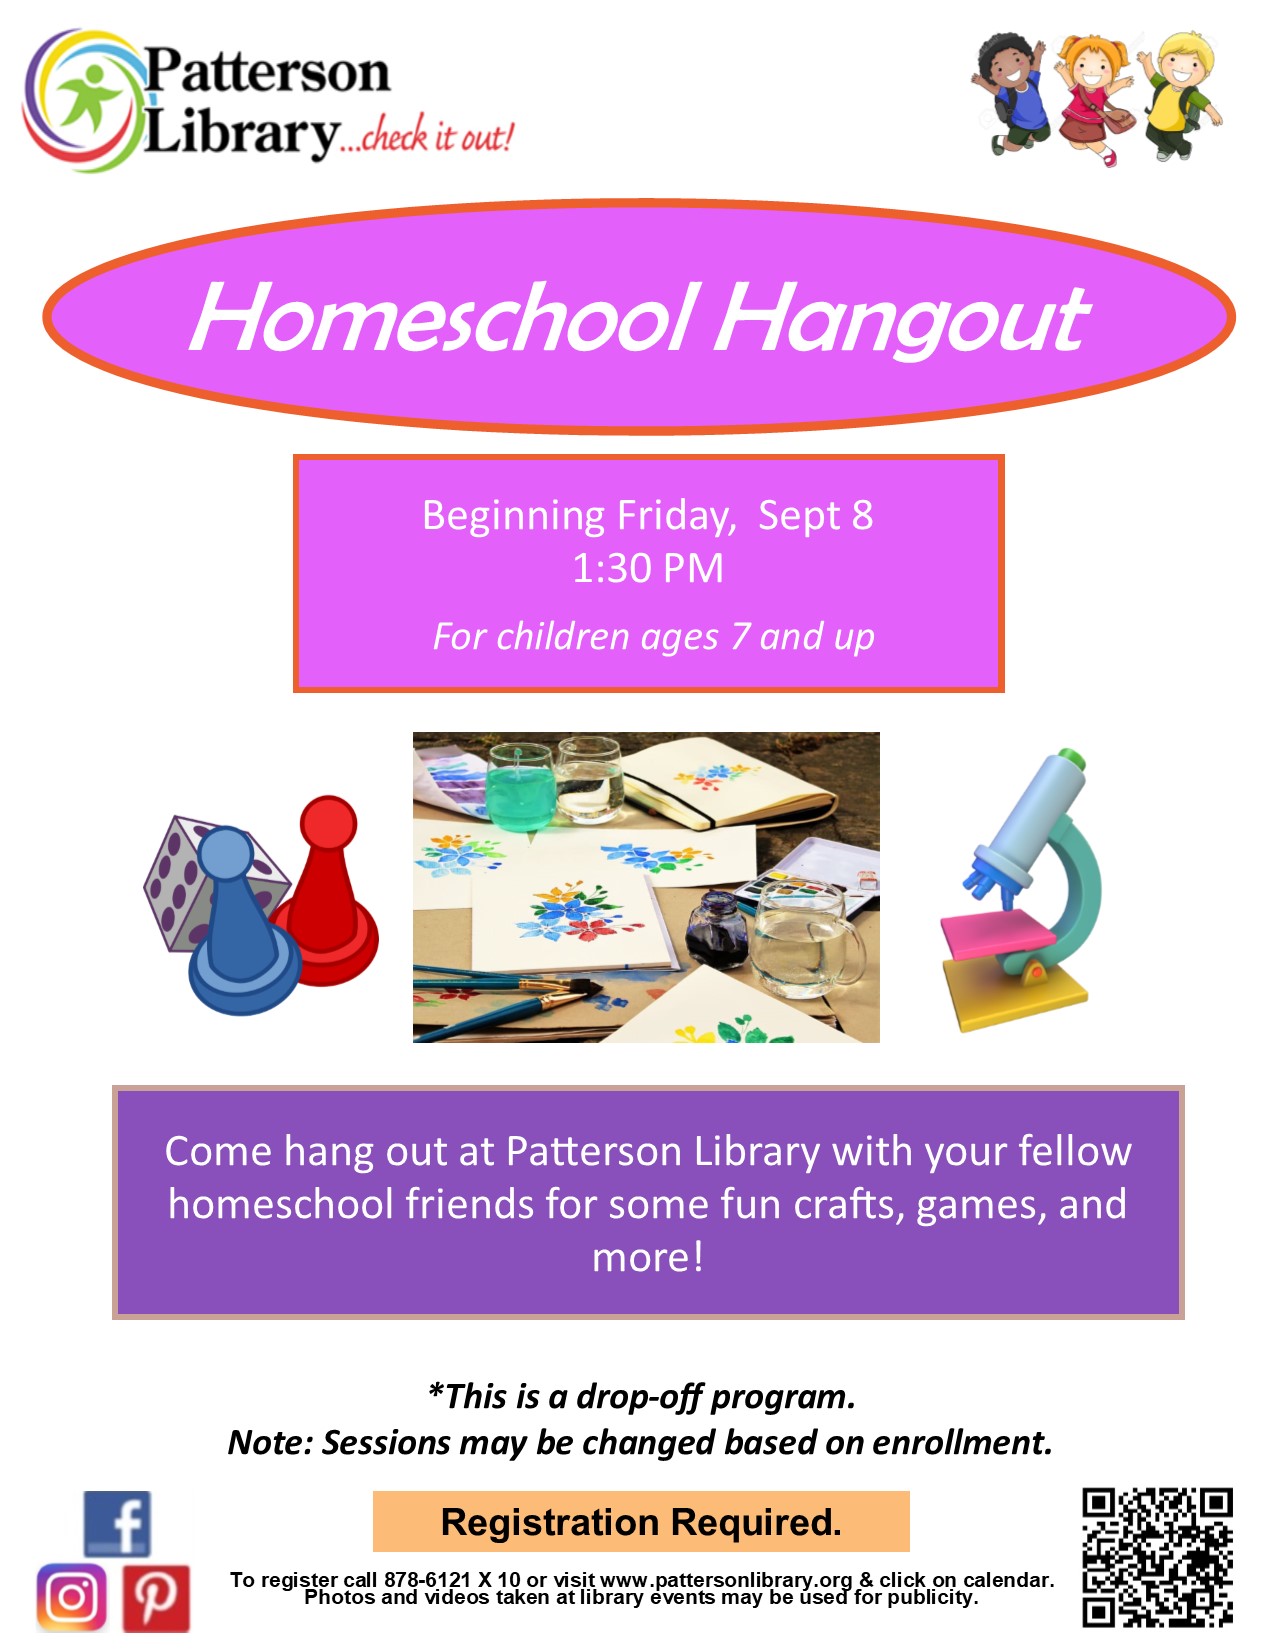 Come hang out at Patterson Library with your fellow homeschool friends.